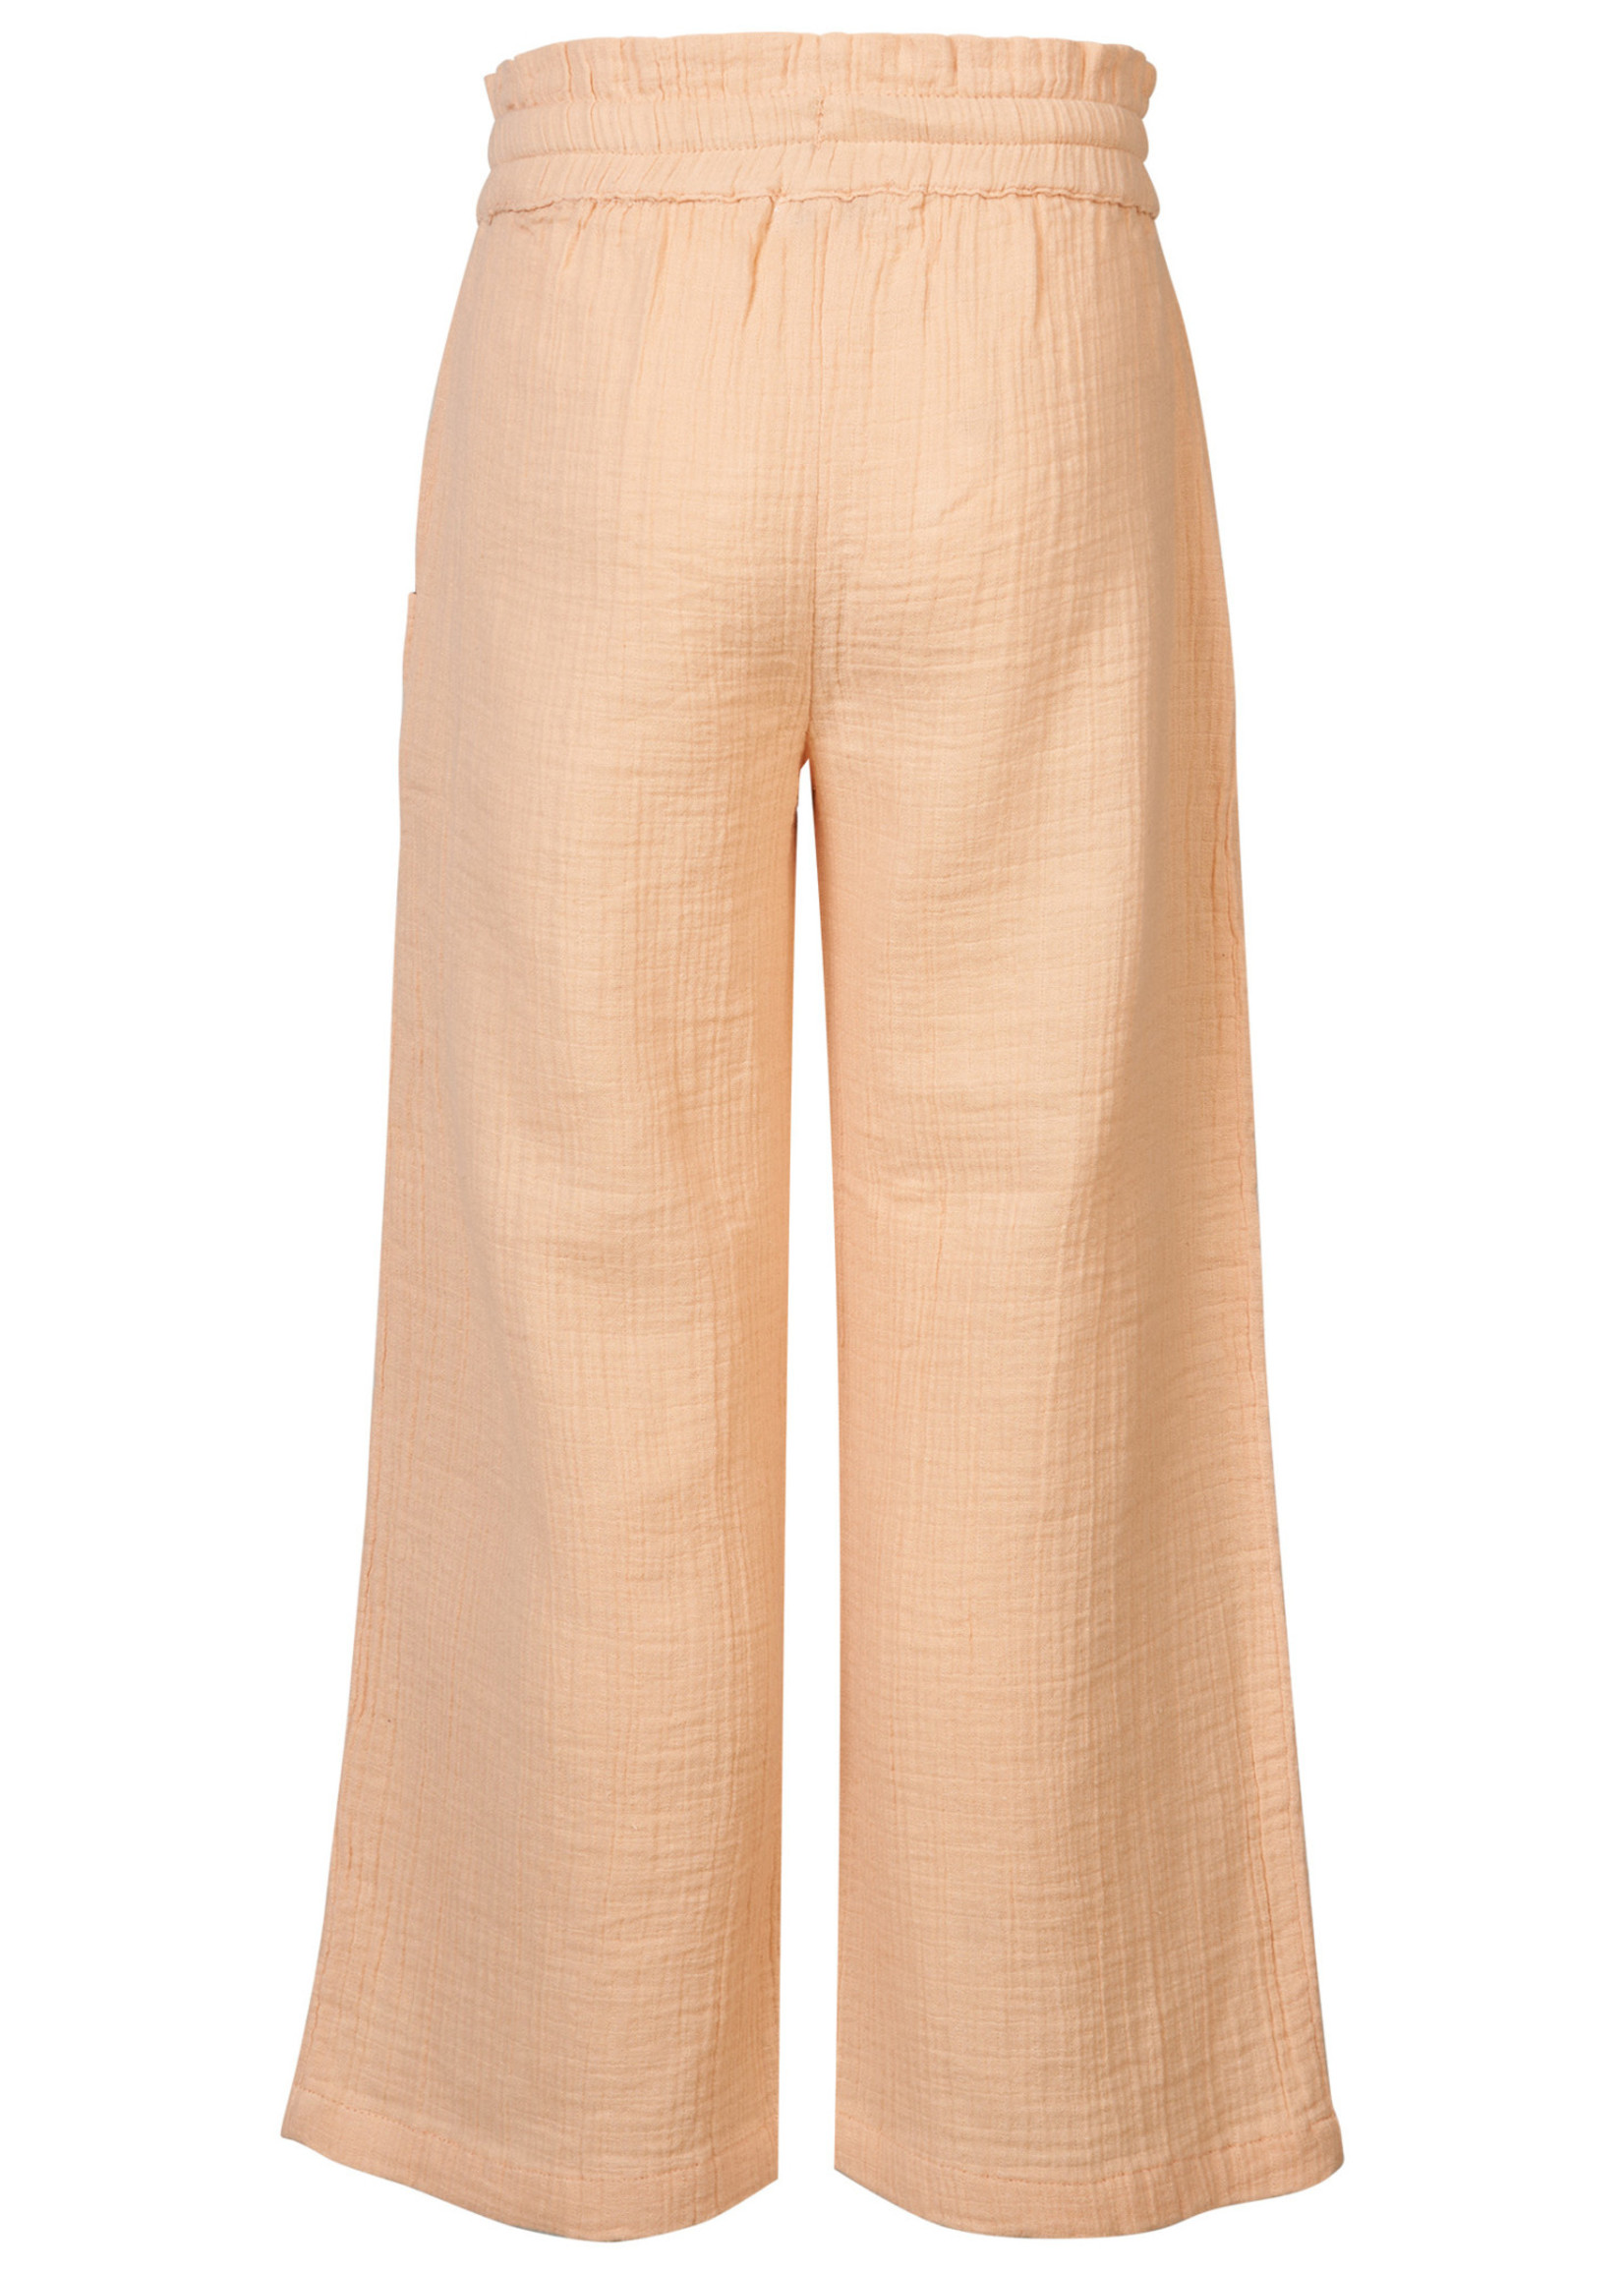 Noppies Noppies-Girls Pants Poinciana relaxed